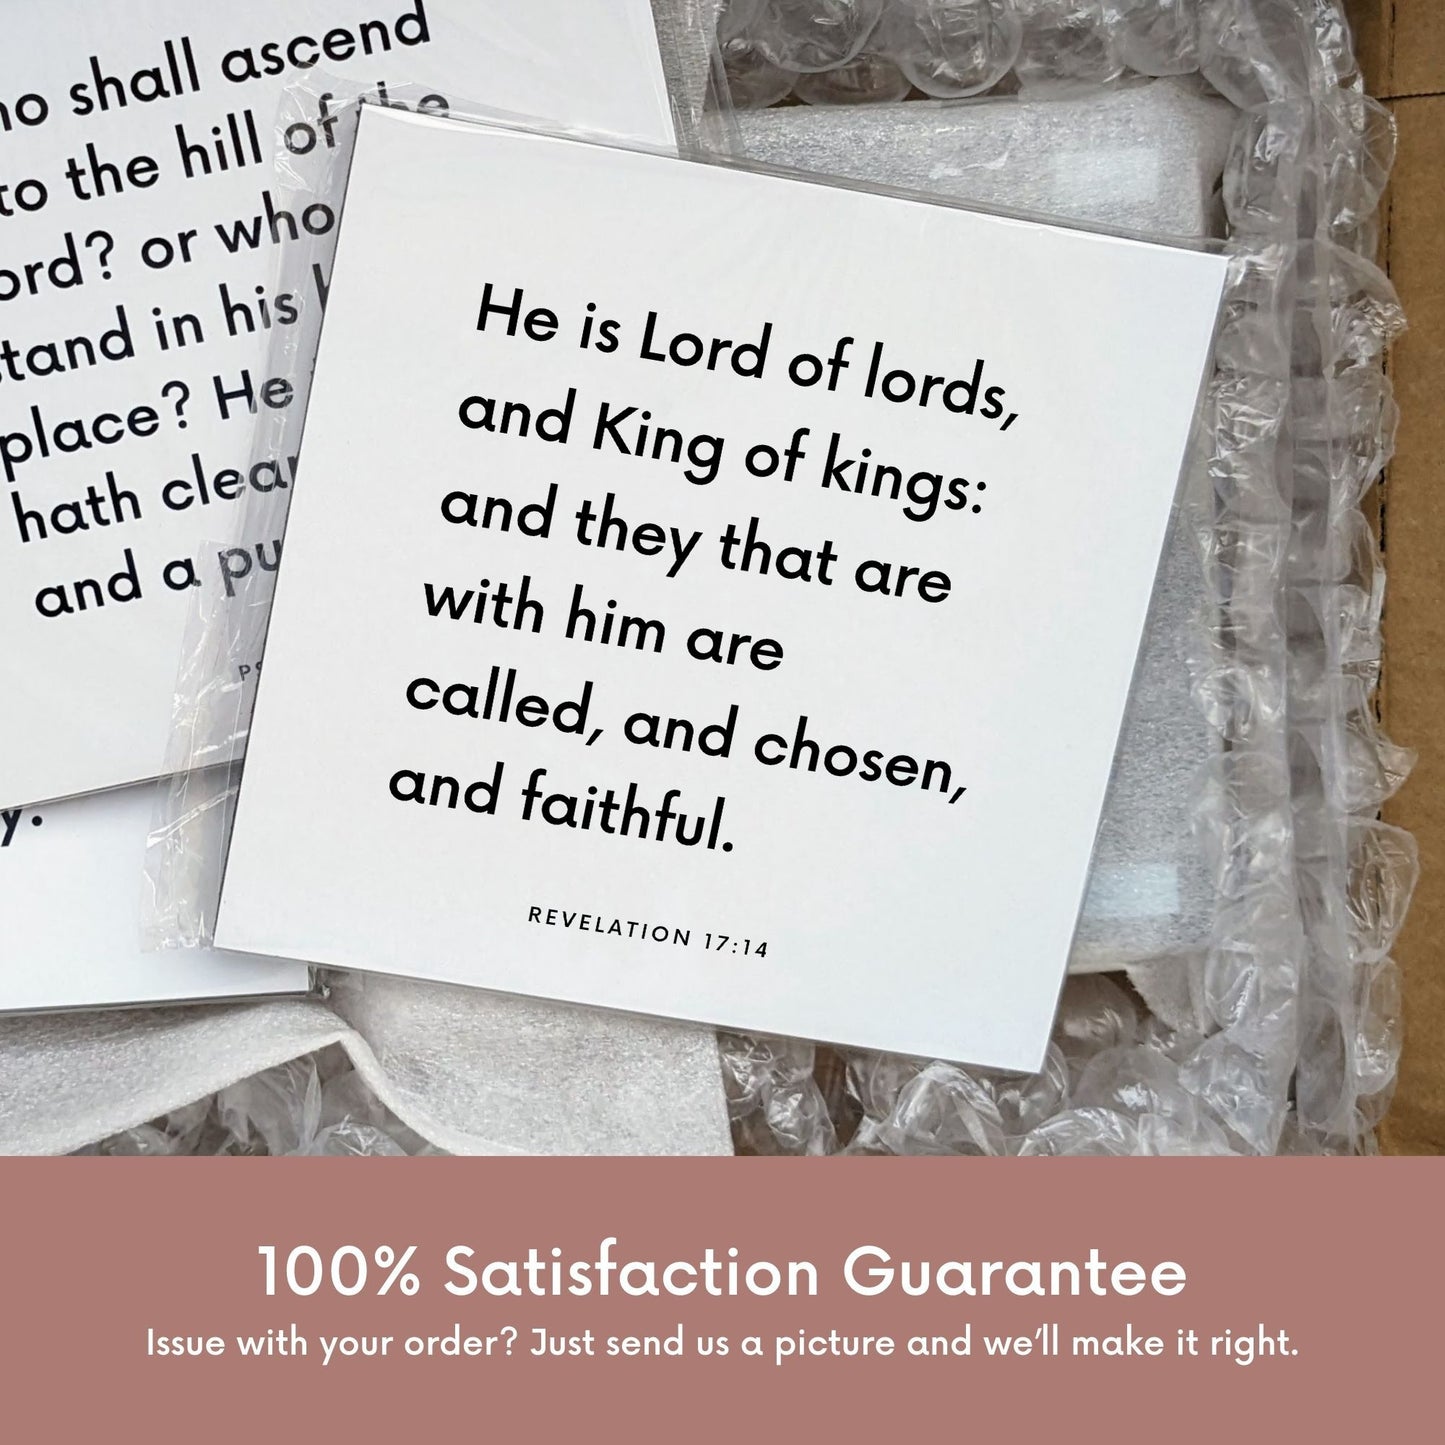 Shipping materials for scripture tile of Revelation 17:14 - "He is Lord of lords, and King of kings"